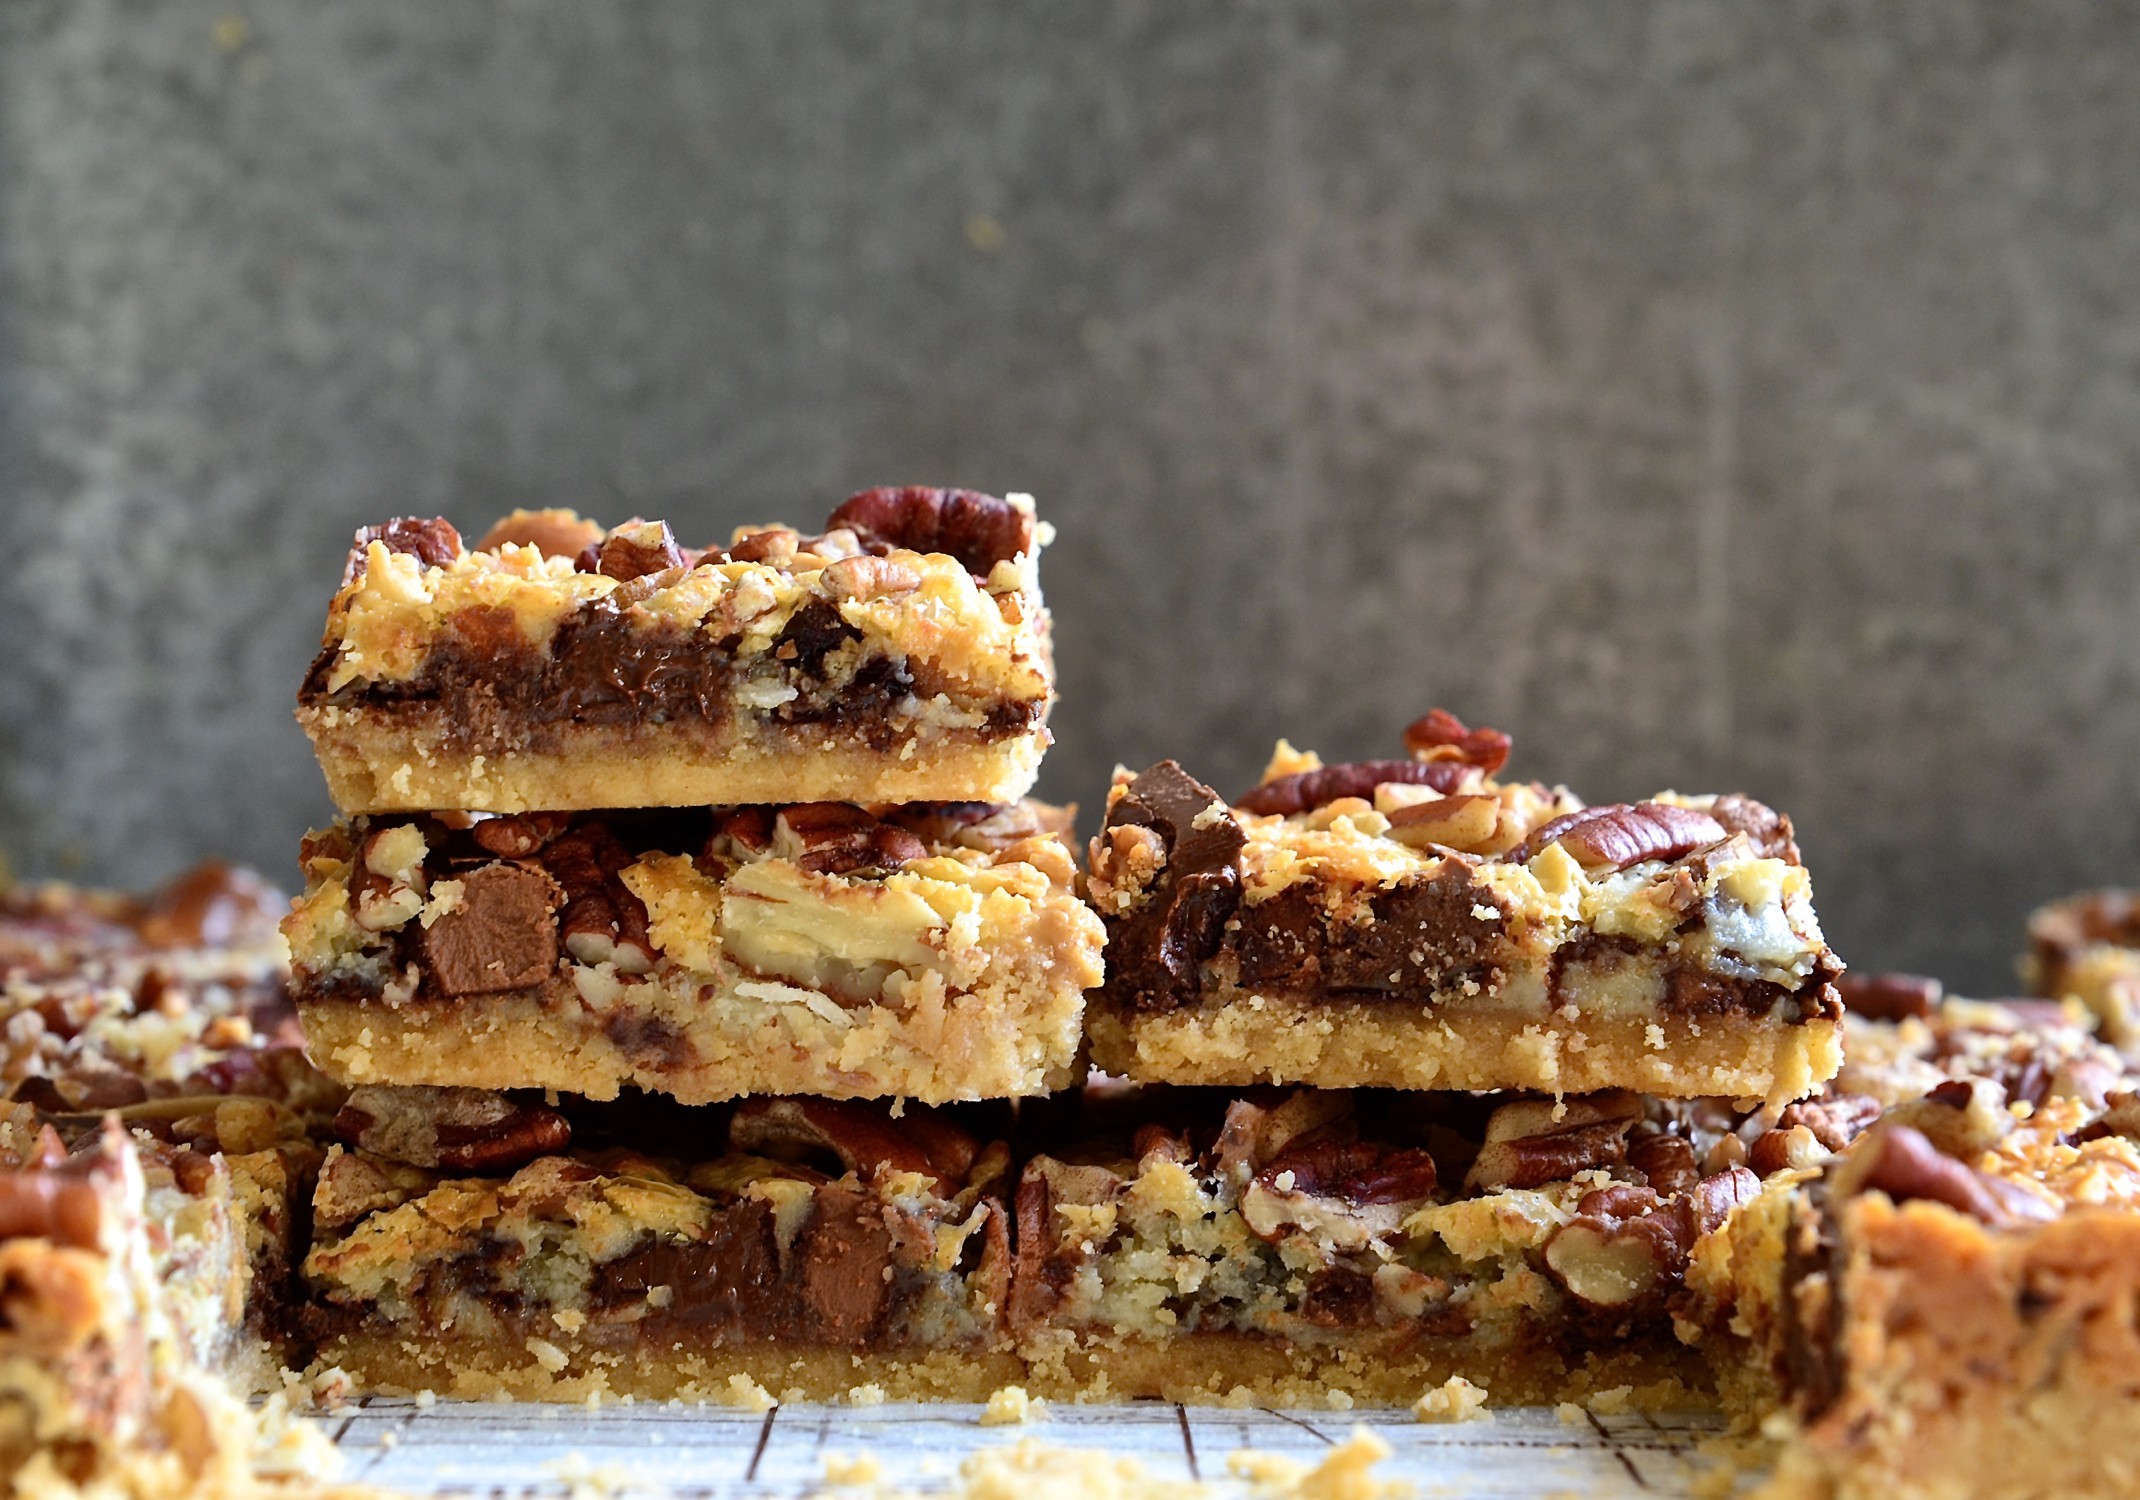 Peanut butter and toffee-caramel chocolate bars